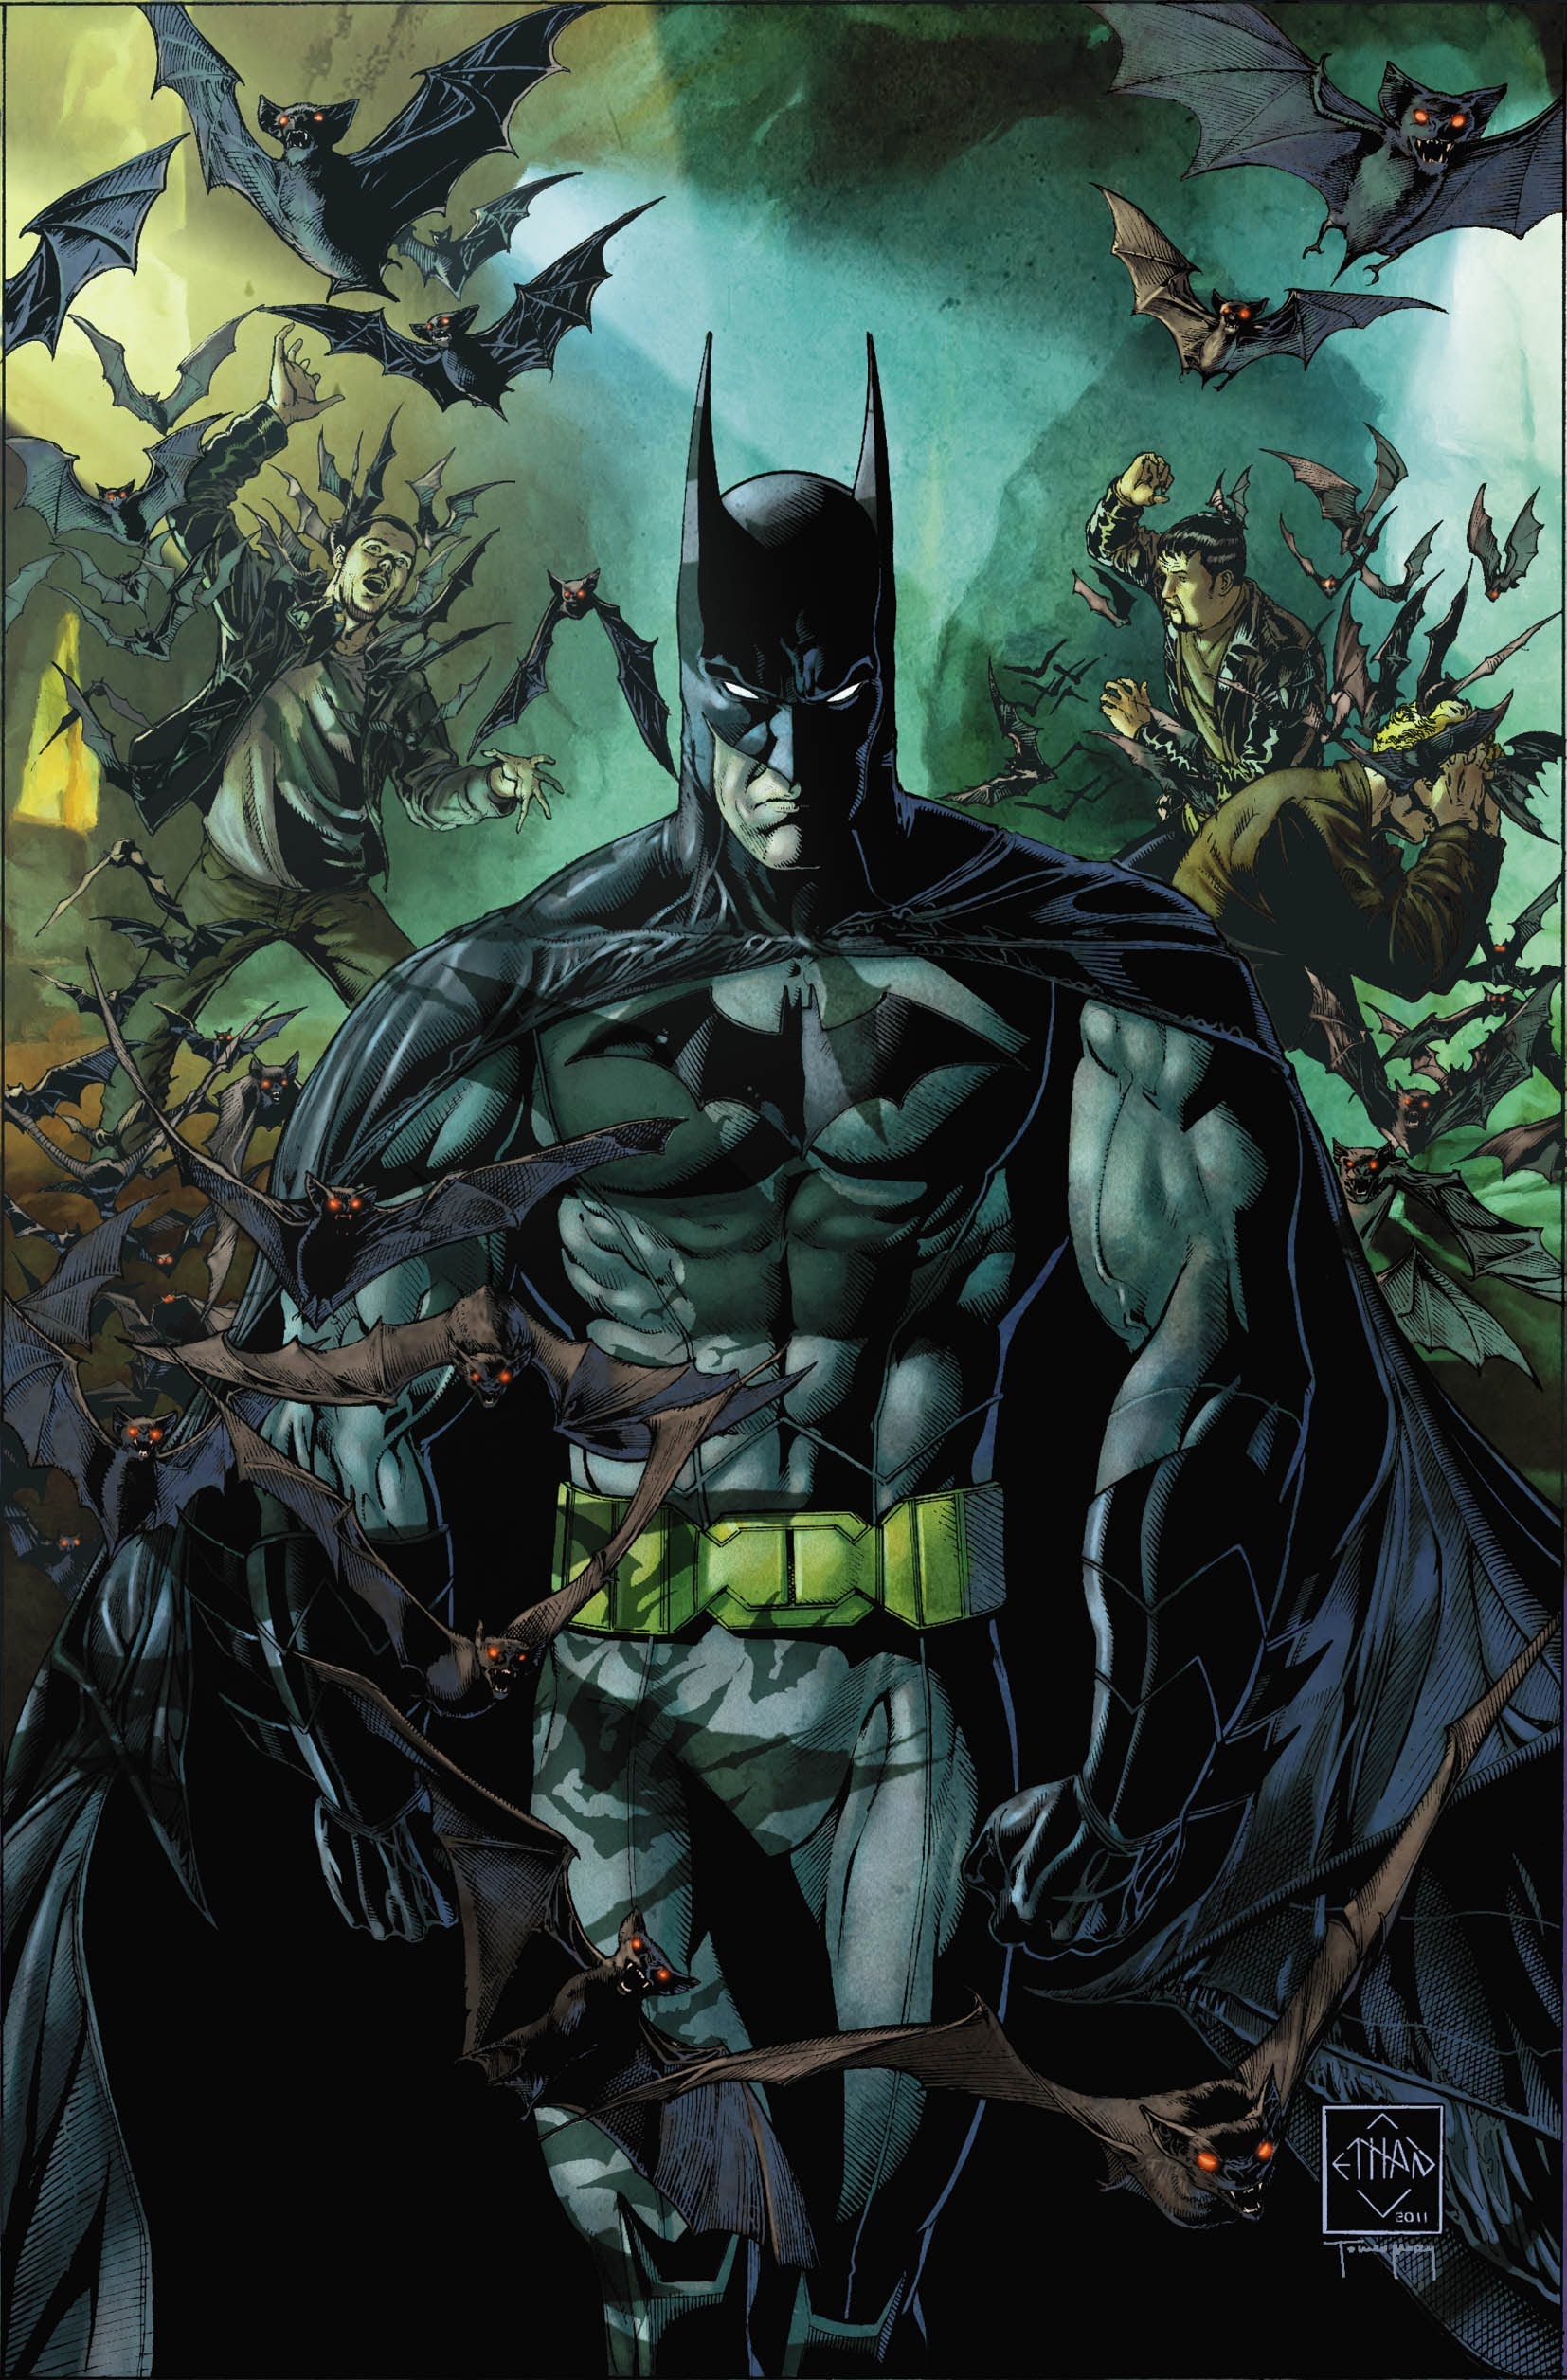 Download Batman The New 52: Intense Stare and Shadows Wallpaper